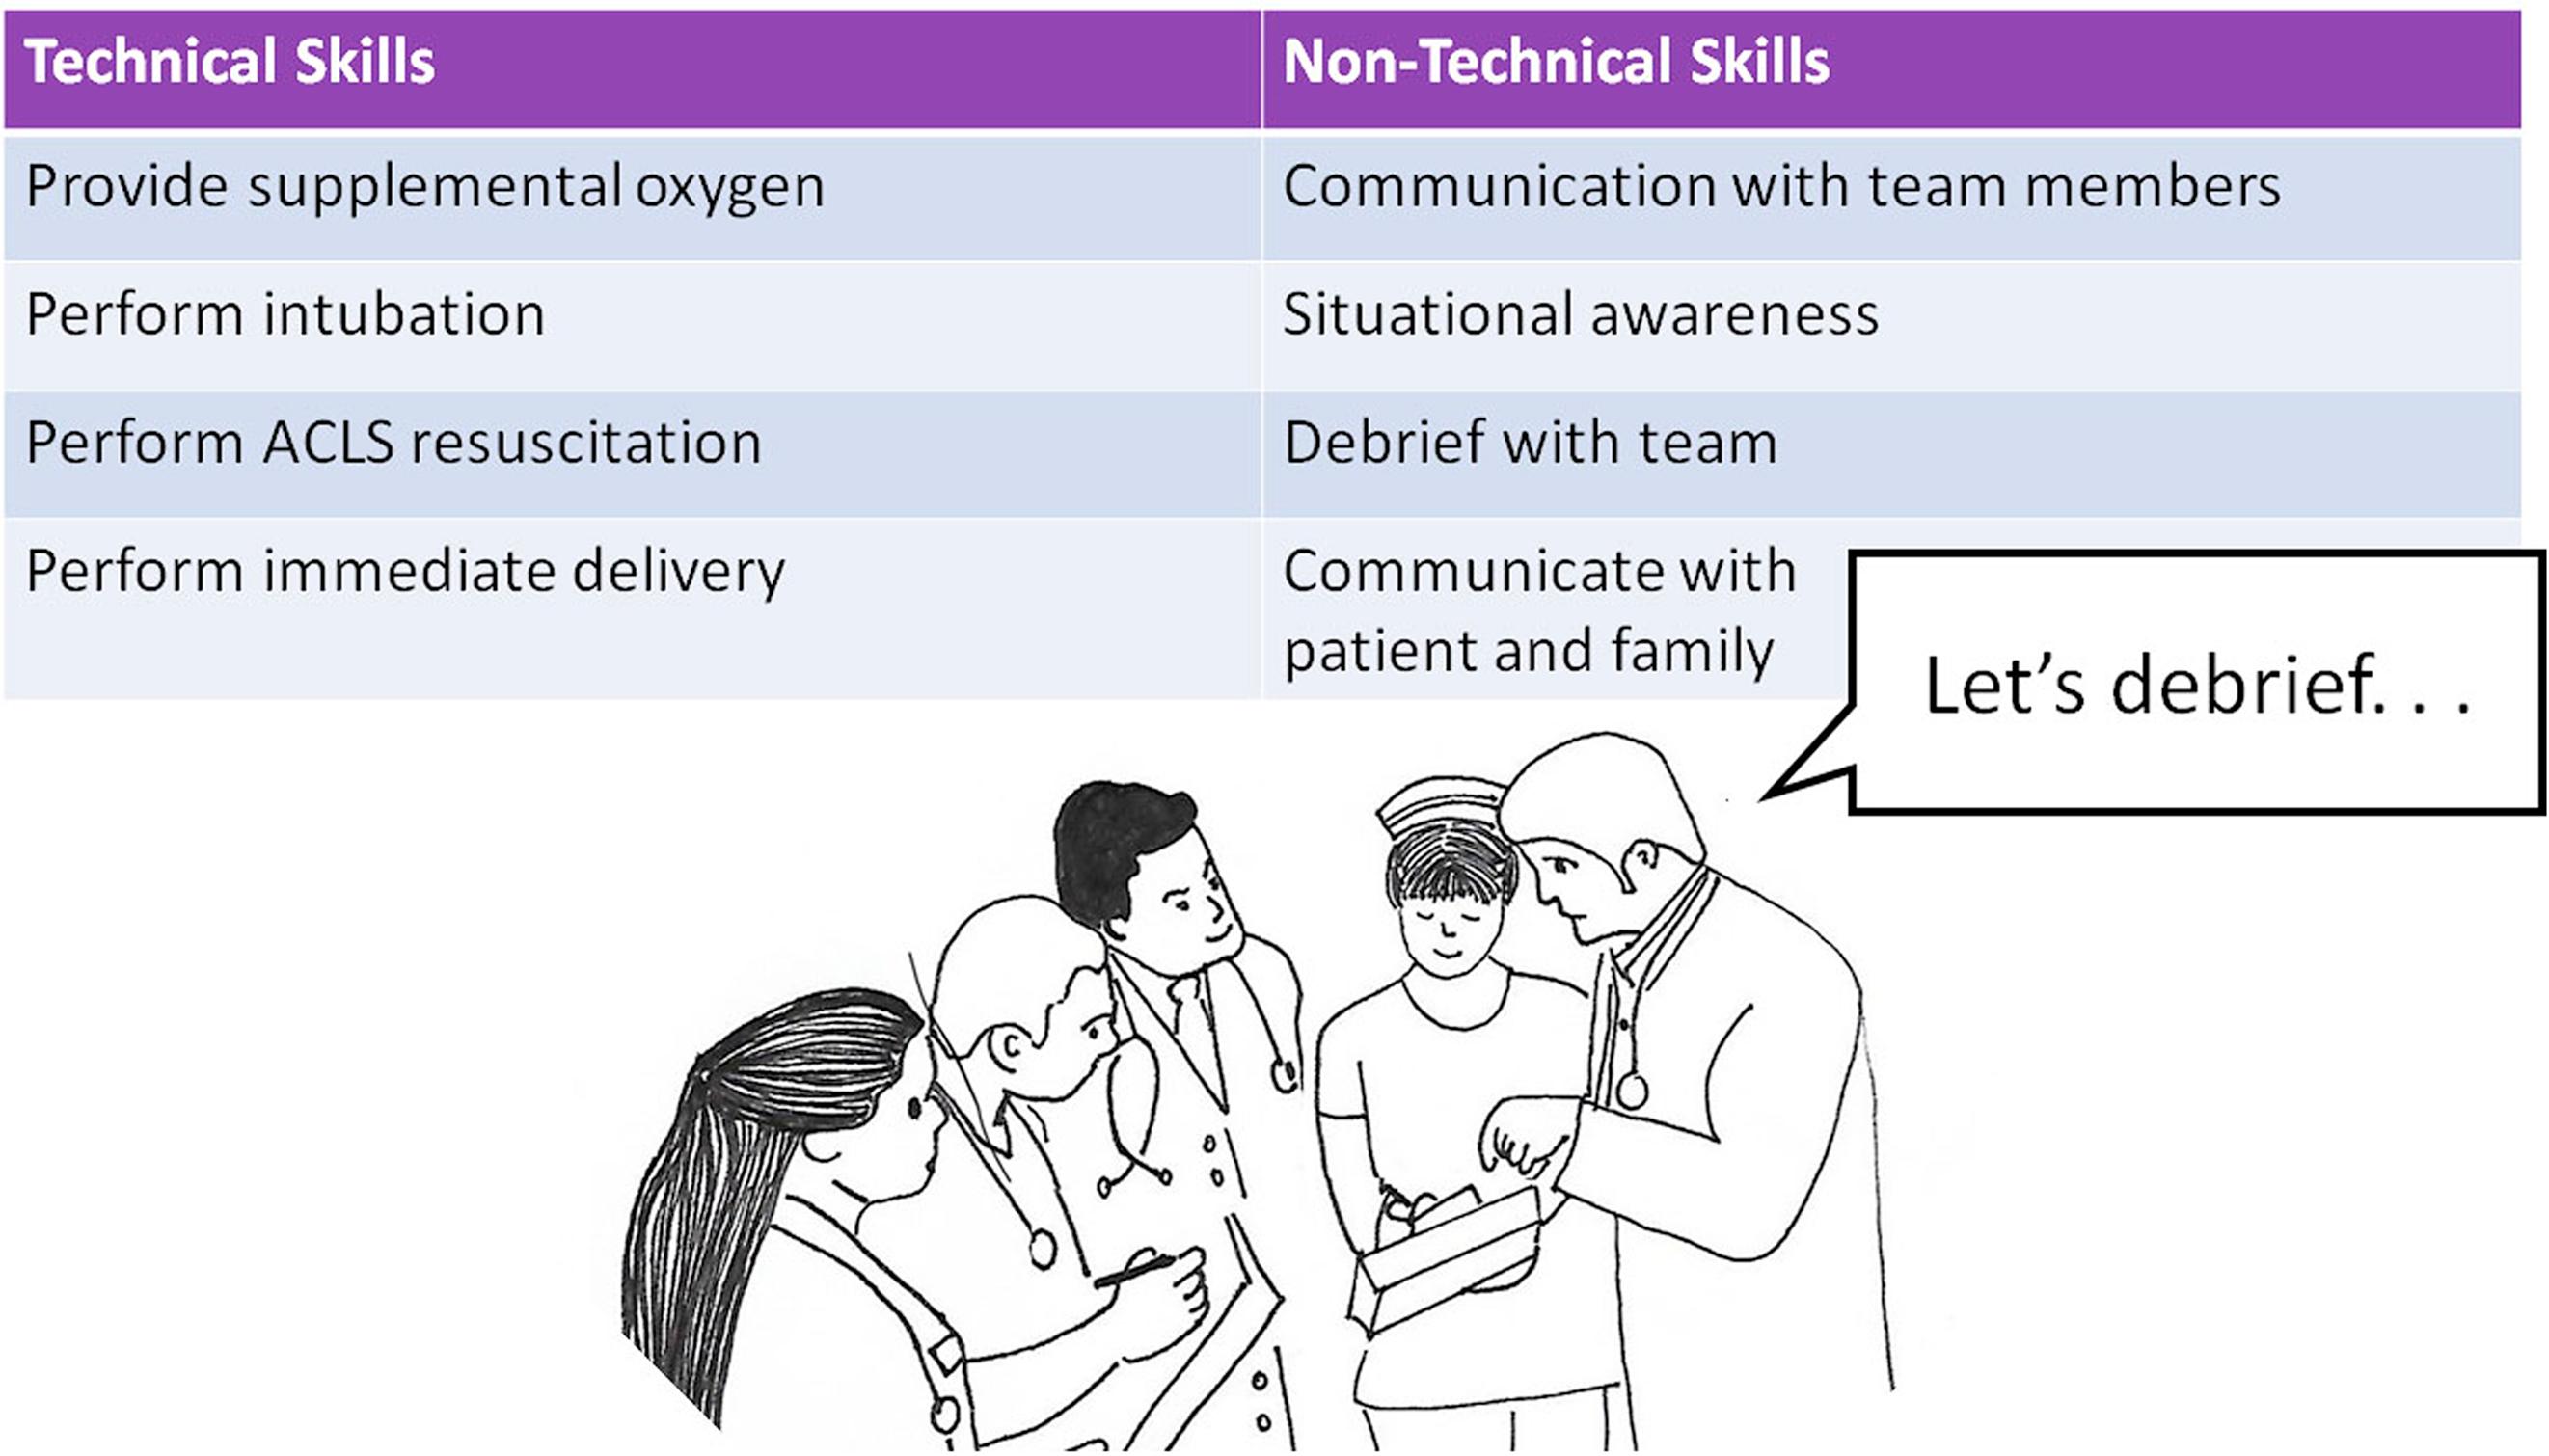 Technical and nontechnical skills in management of amniotic fluid embolism.